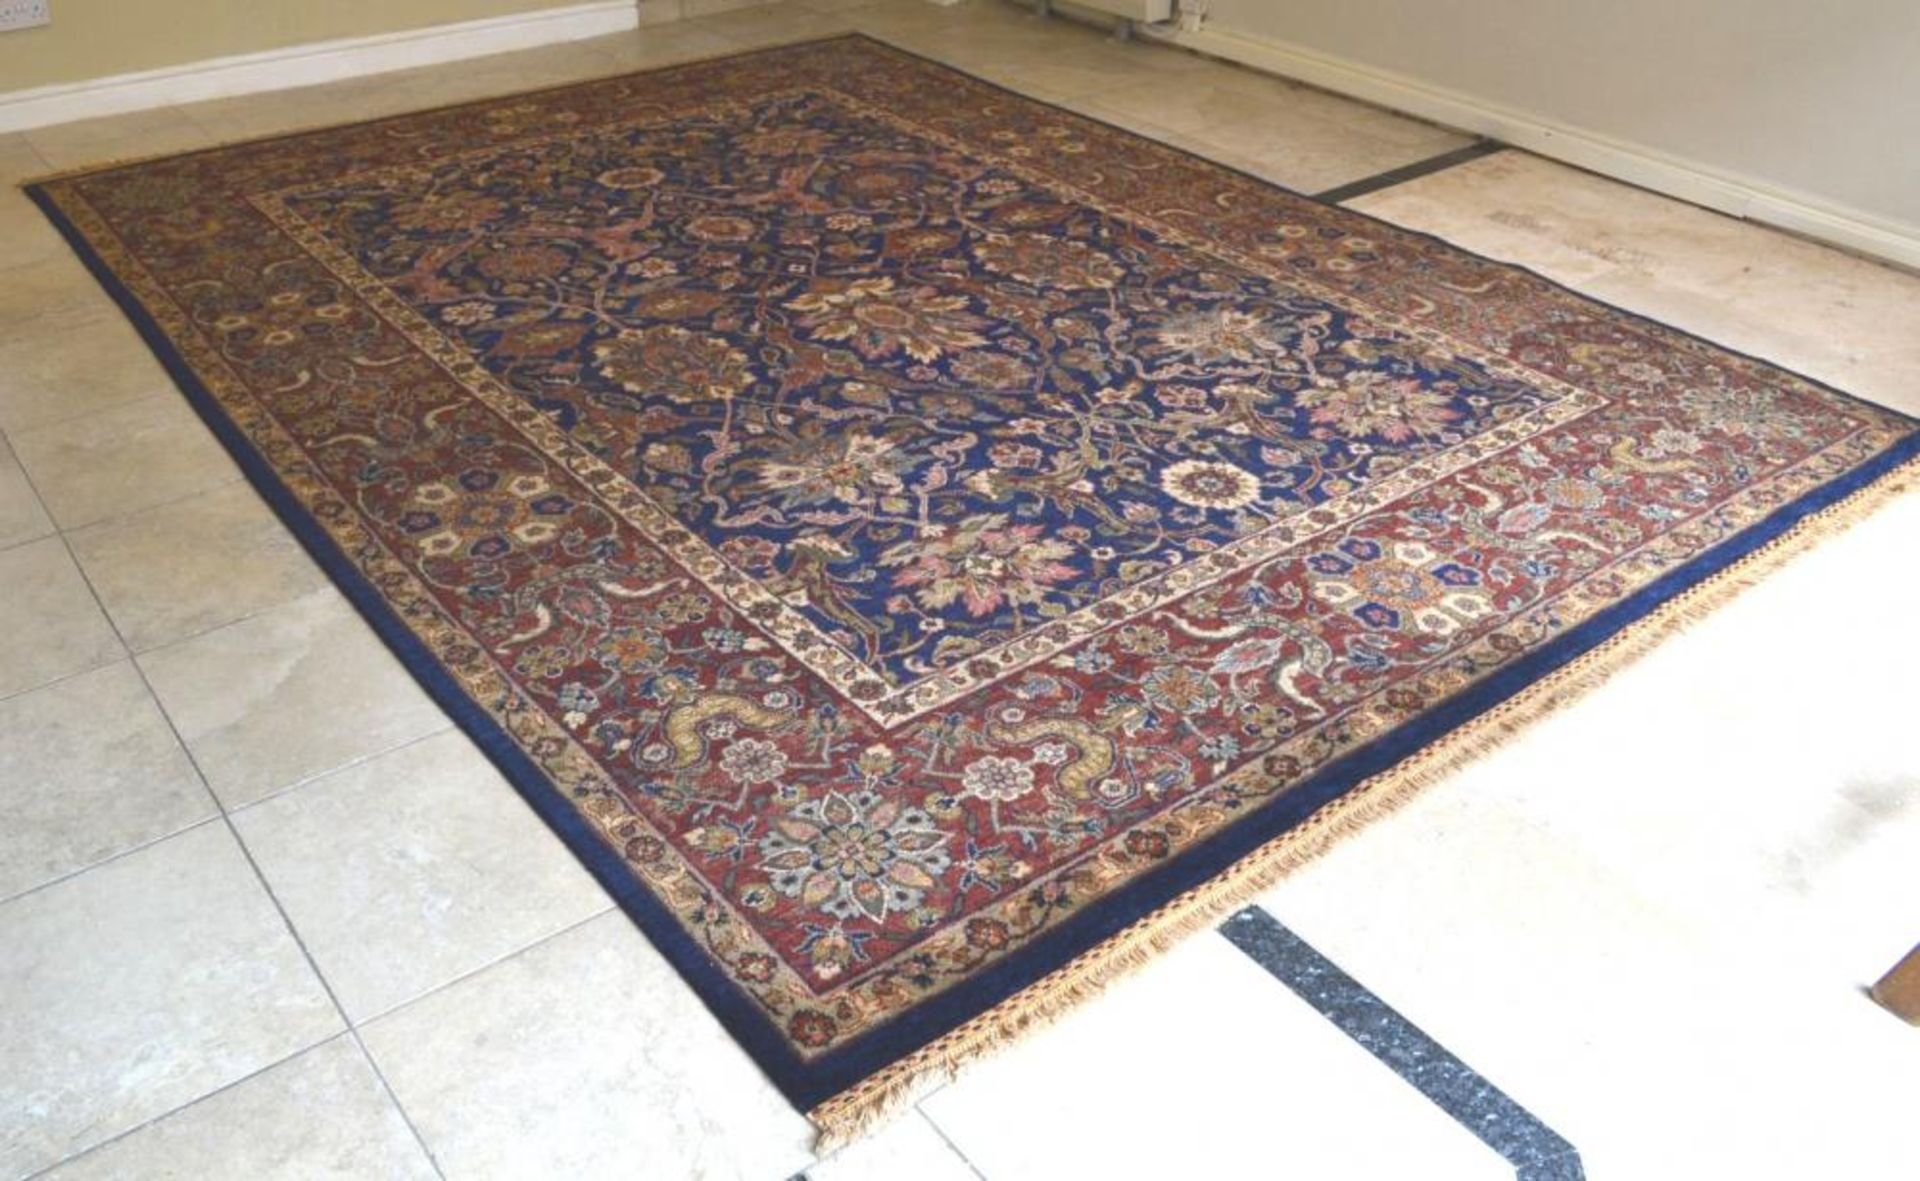 1 x Fine Indian Vegetable Dyed Handmade Carpet in Navy and Rust - All Wool With Cotton Foundation - - Image 17 of 22